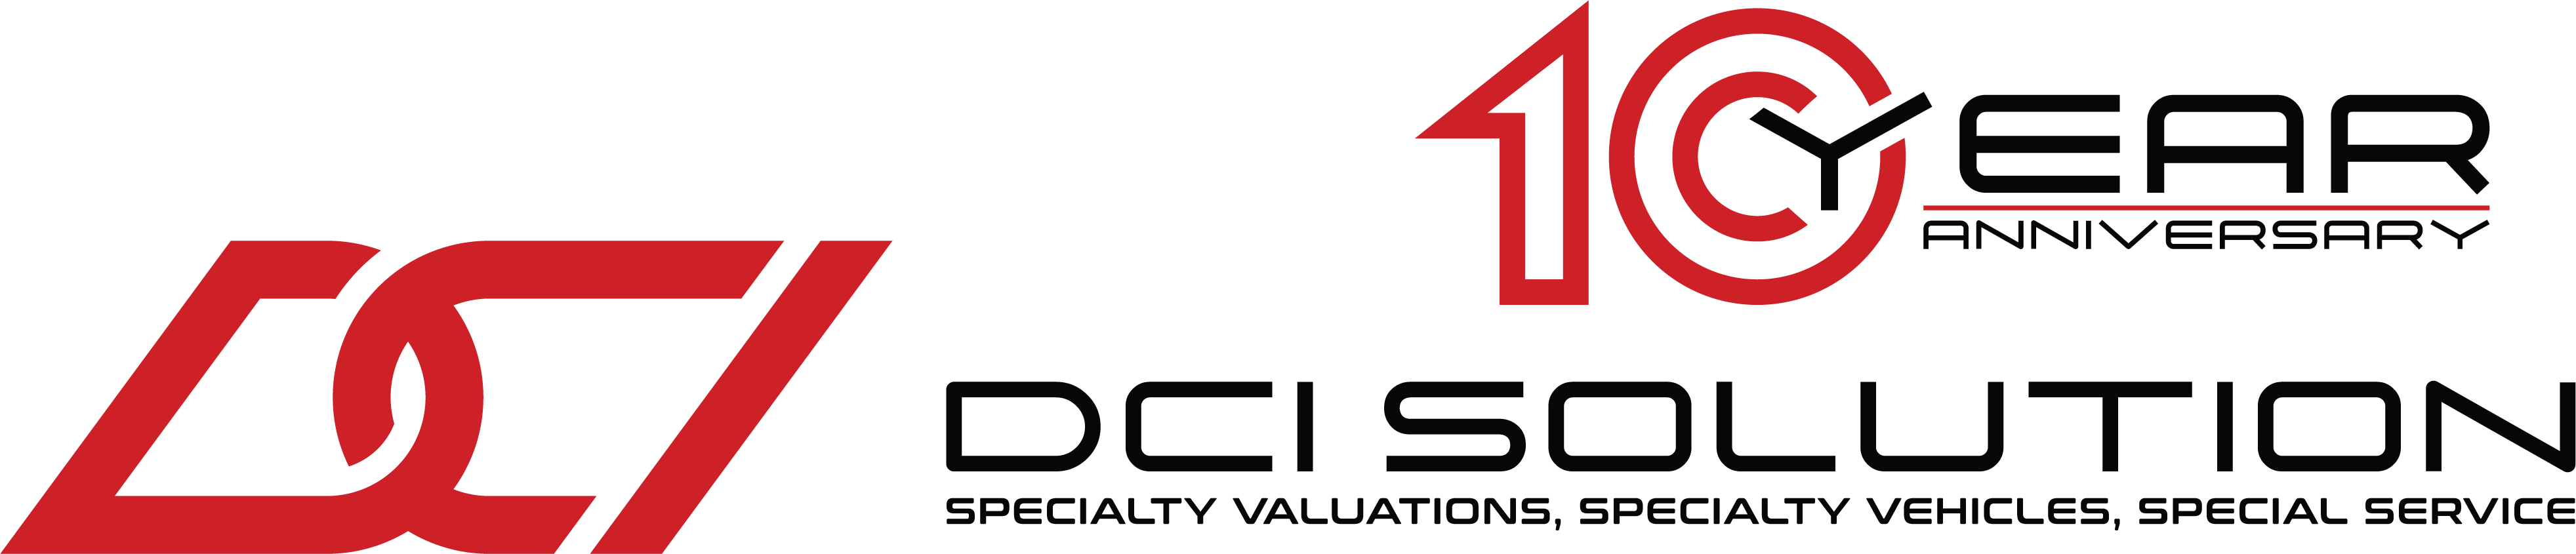 DCI Solution 10 Year Anniversary